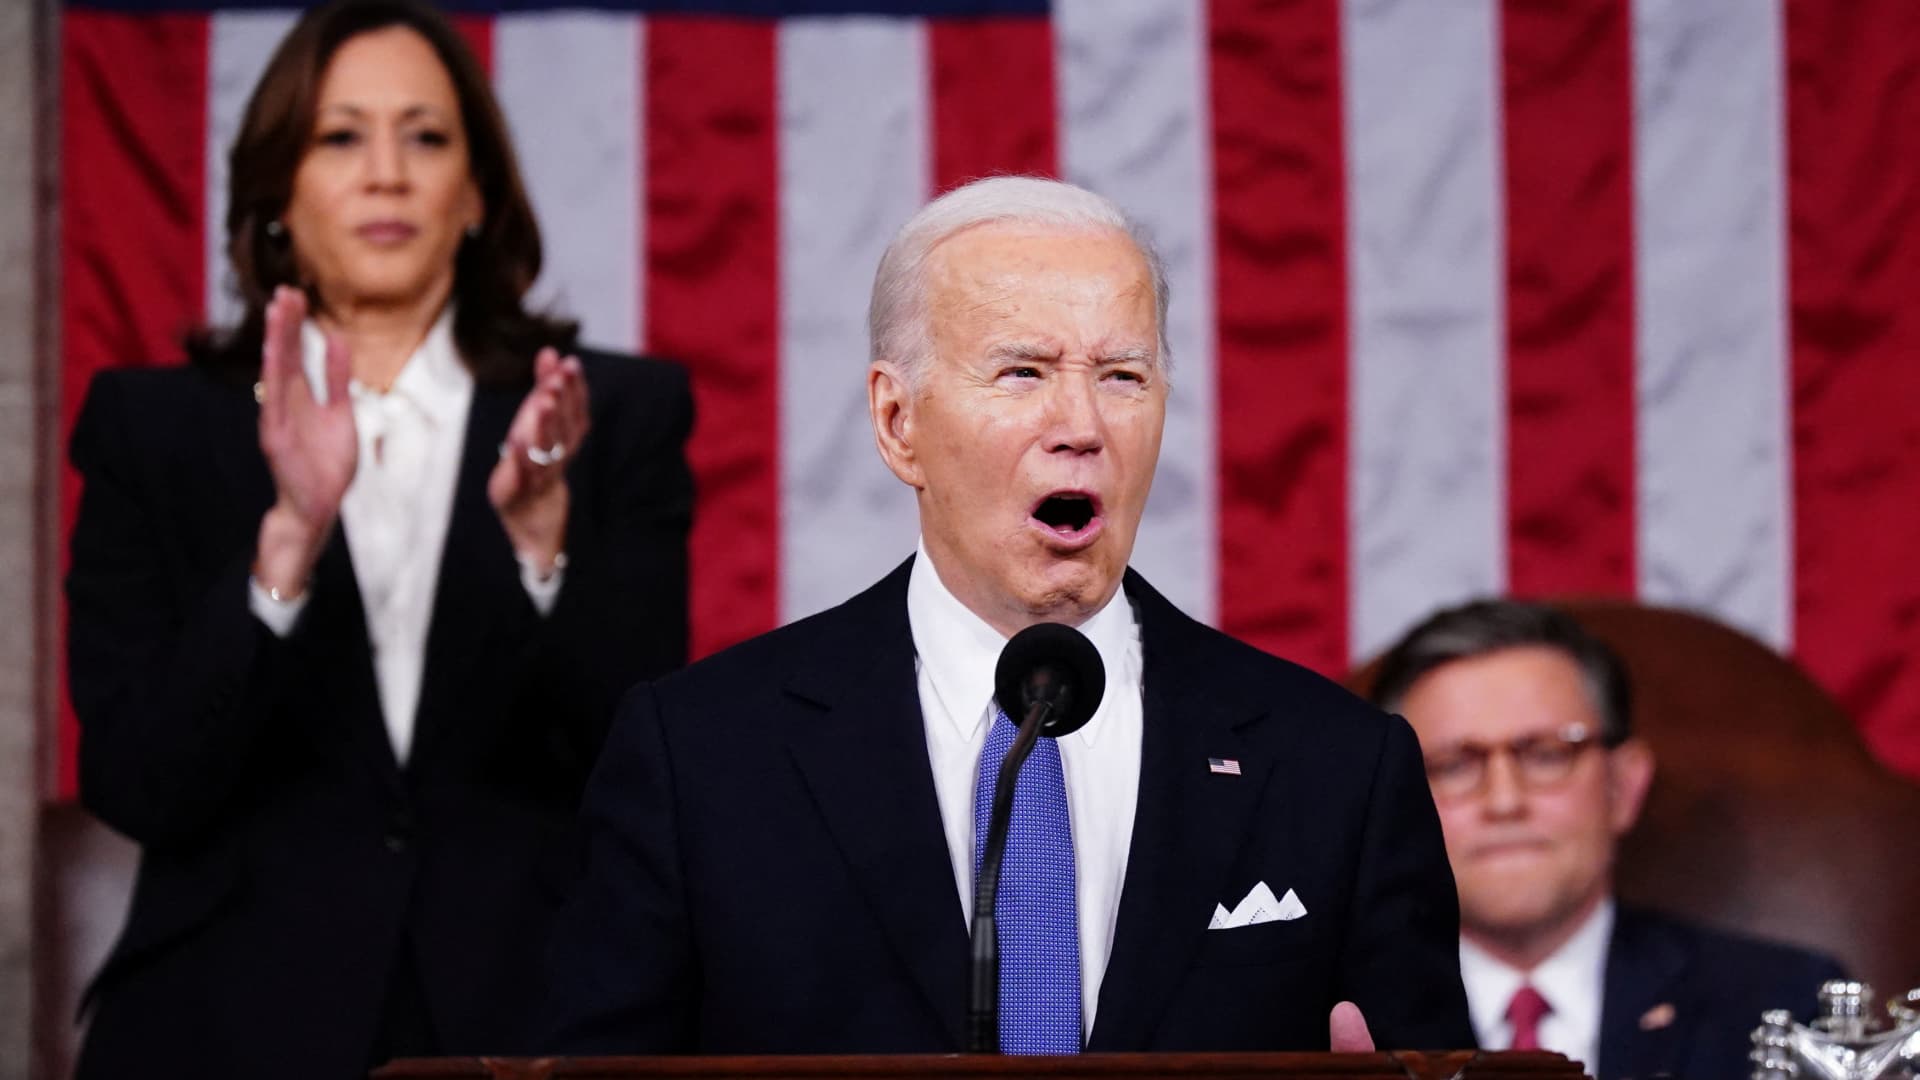 Biden vows to protect Social Security, Medicare and 'make the wealthy pay their fair share,' in State of the Union